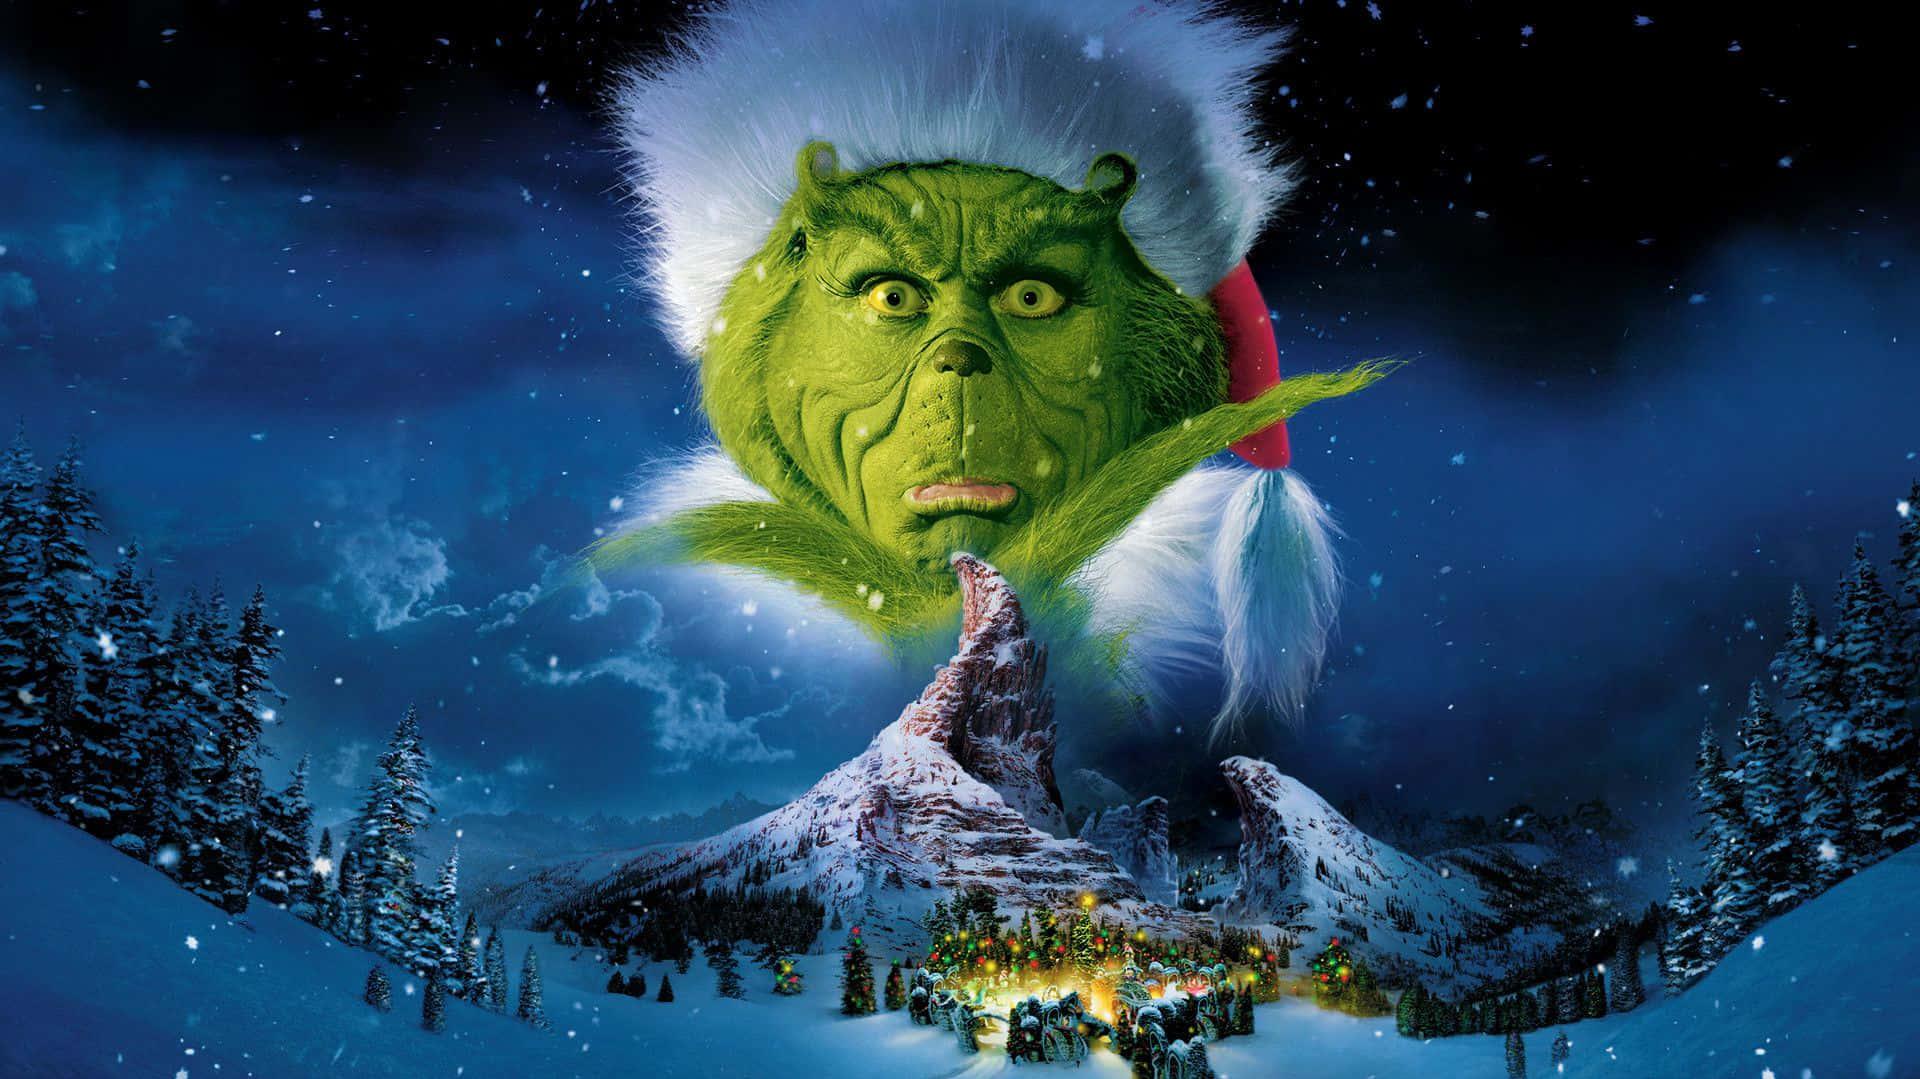 Download The Grinch In The Snow Wallpaper